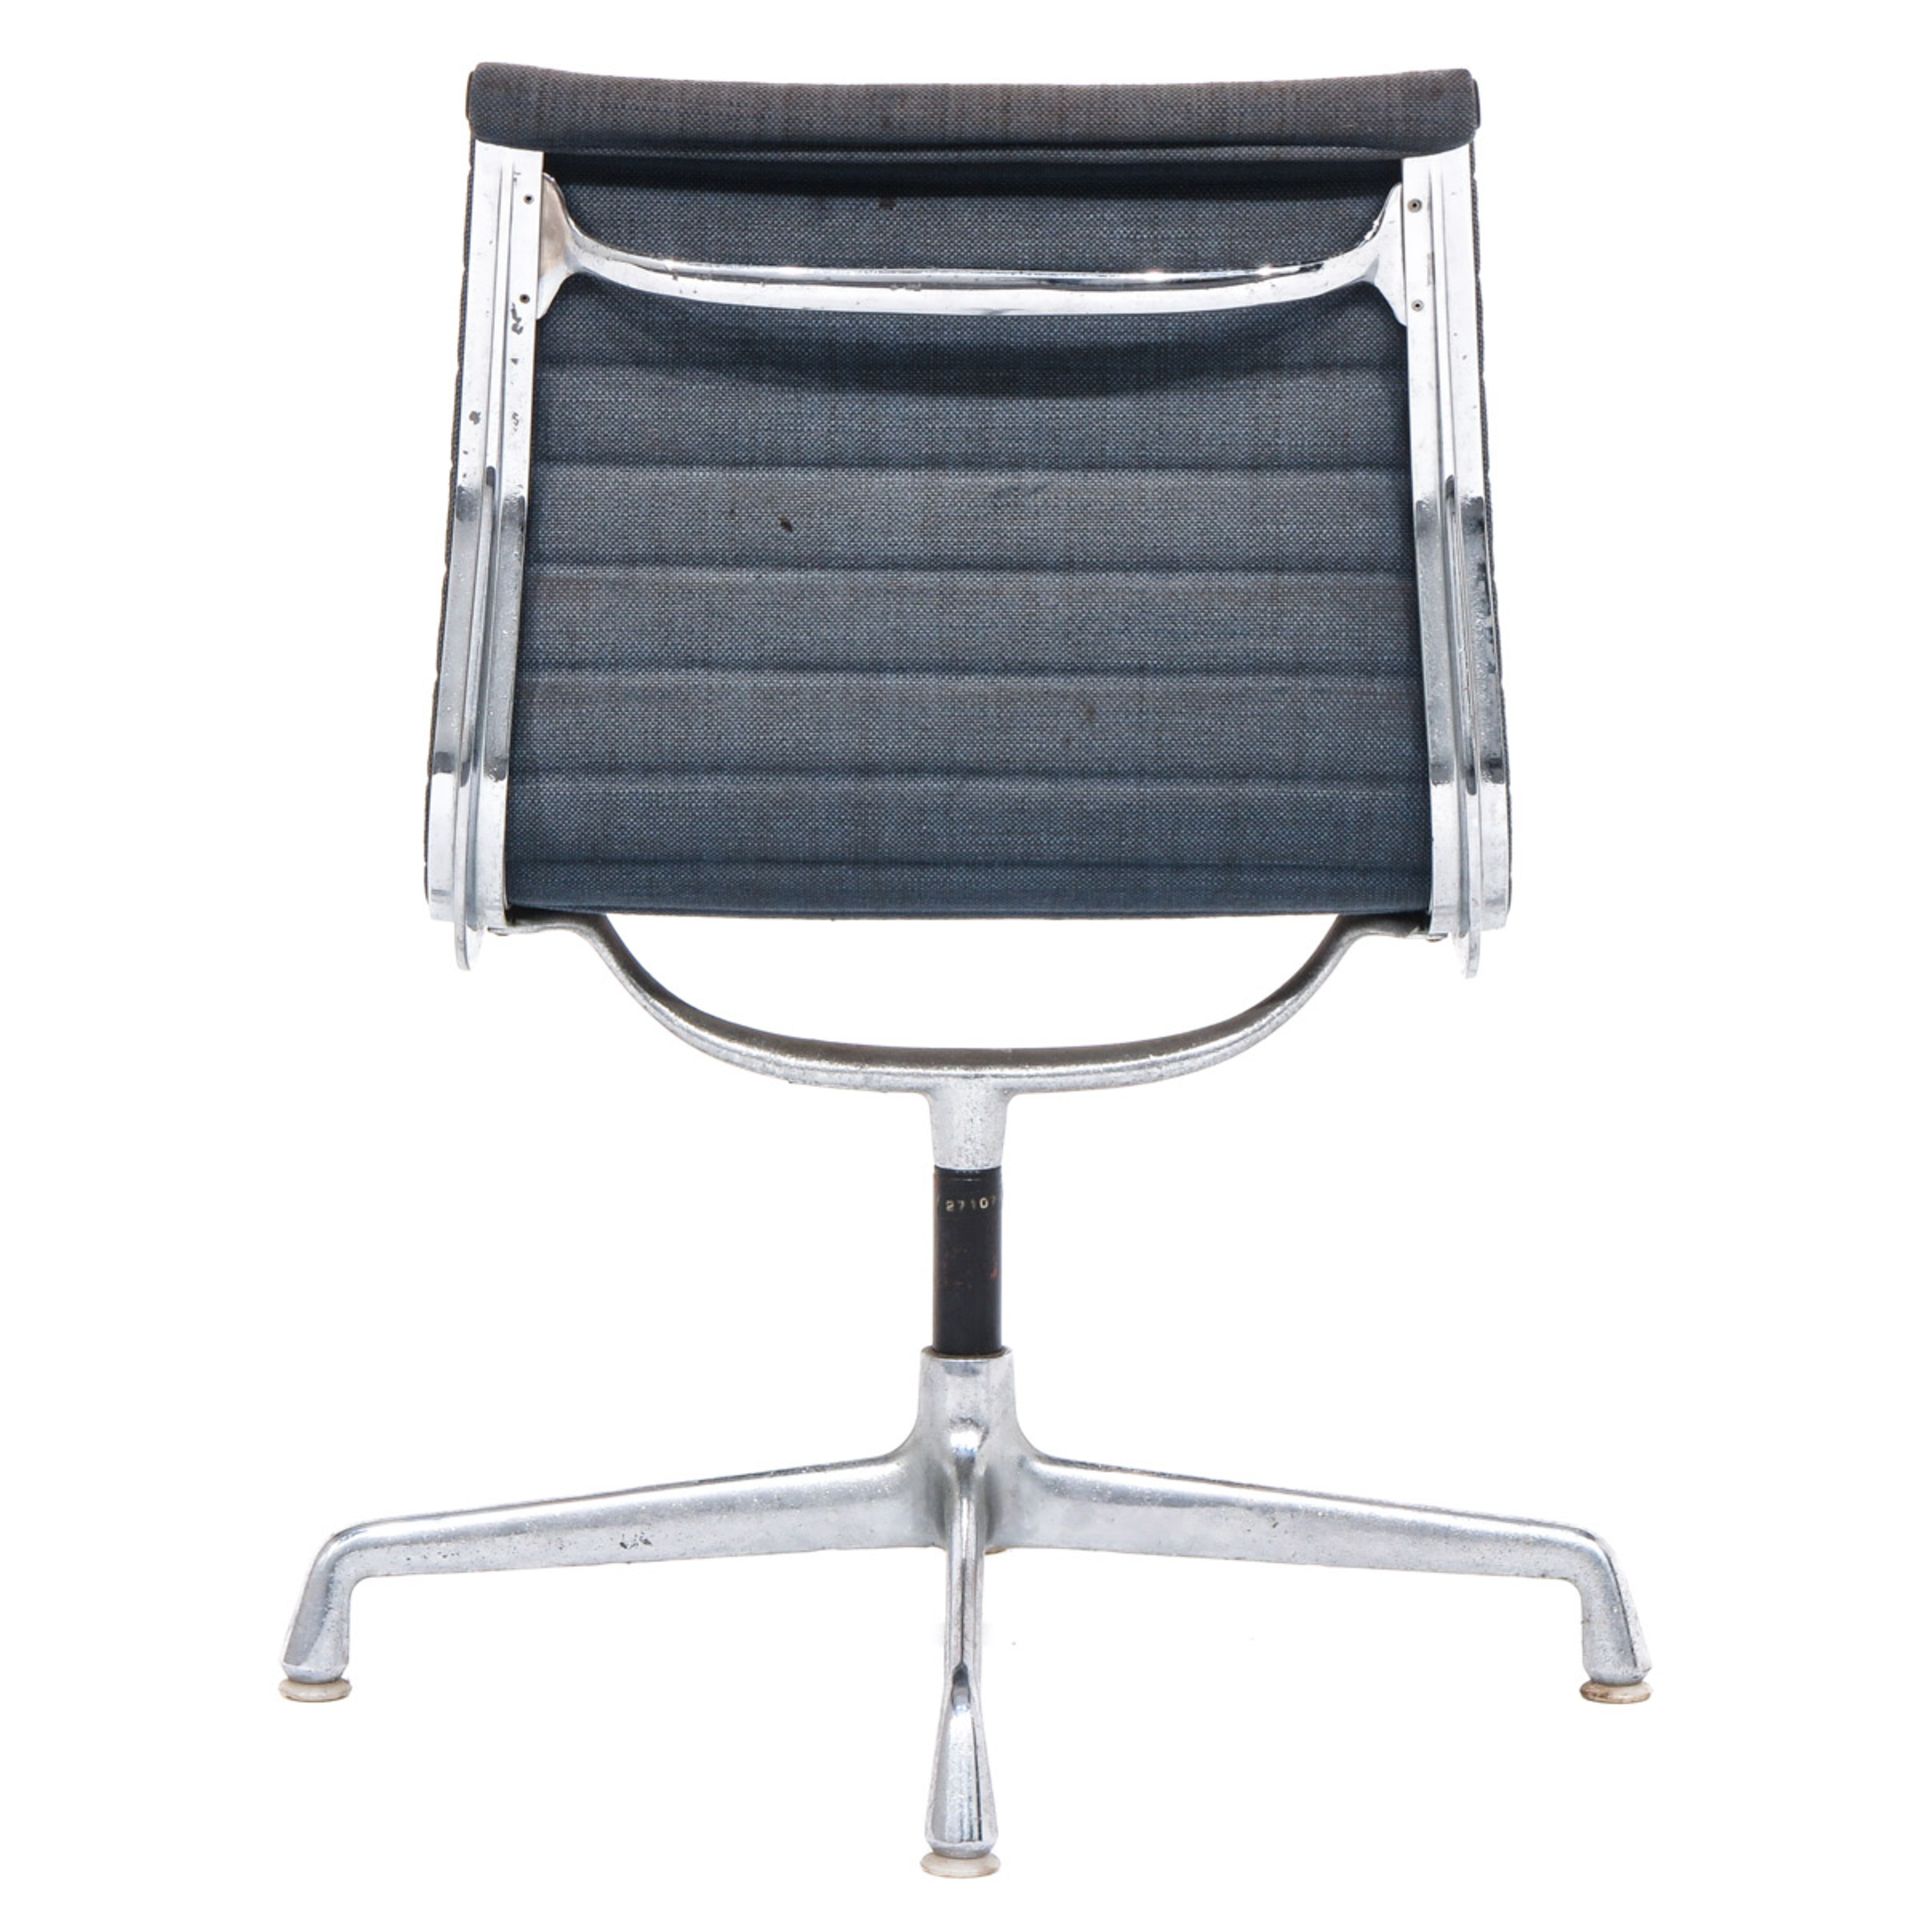 A Charles & Ray Eames Design Office Chair - Image 3 of 9